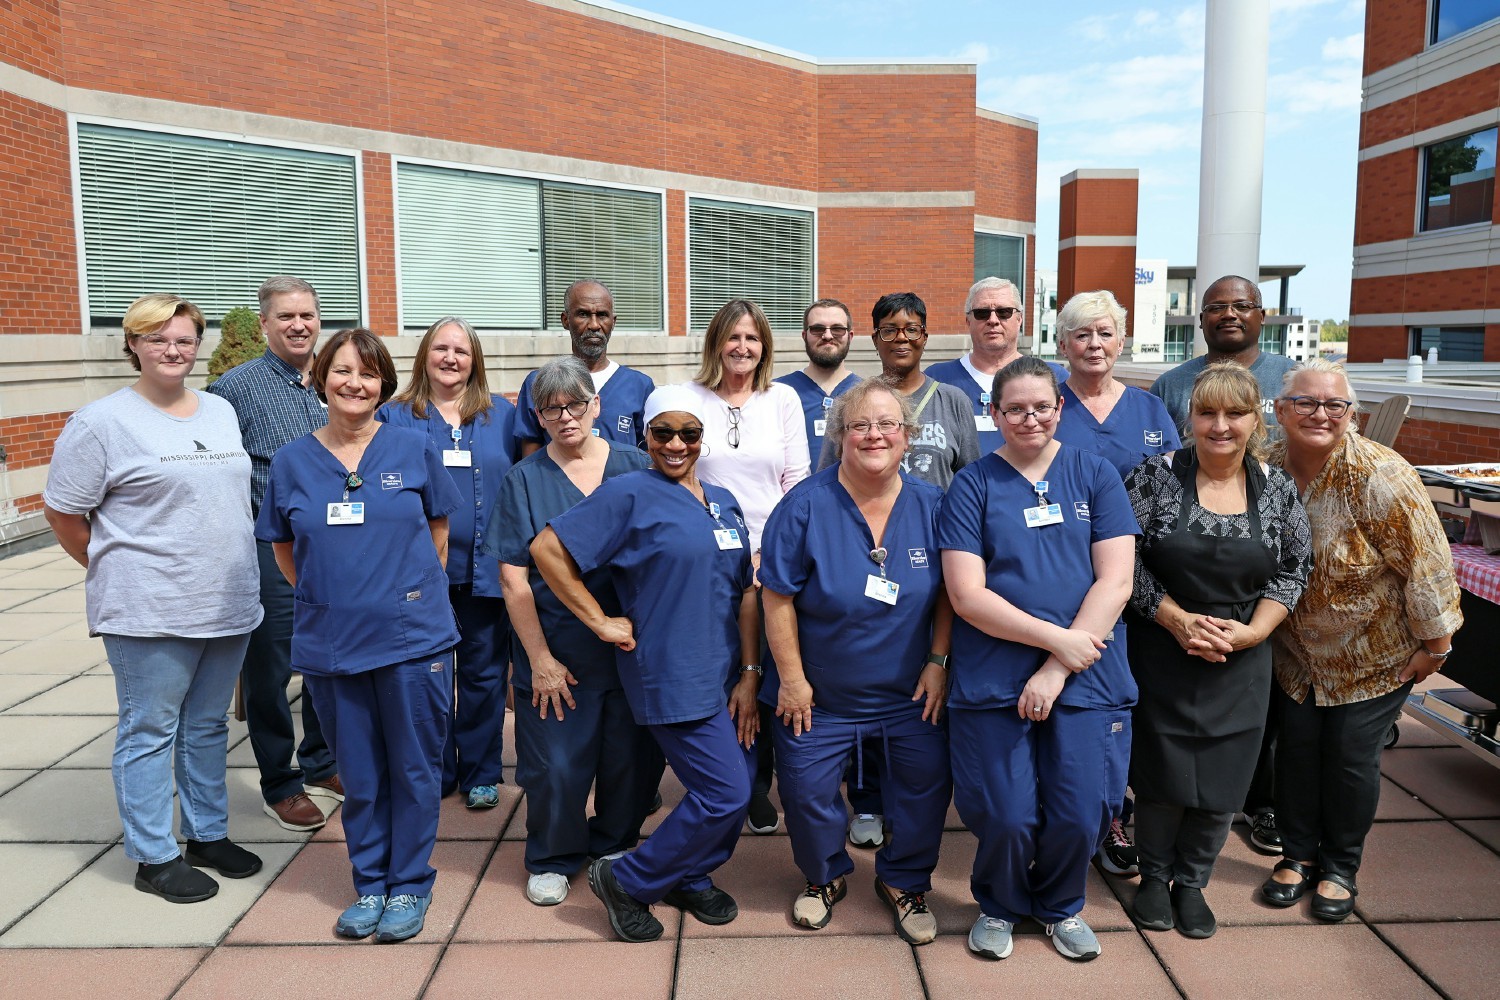 Environmental Services Team celebrating their special week of recognition as key members to patient health and healing.